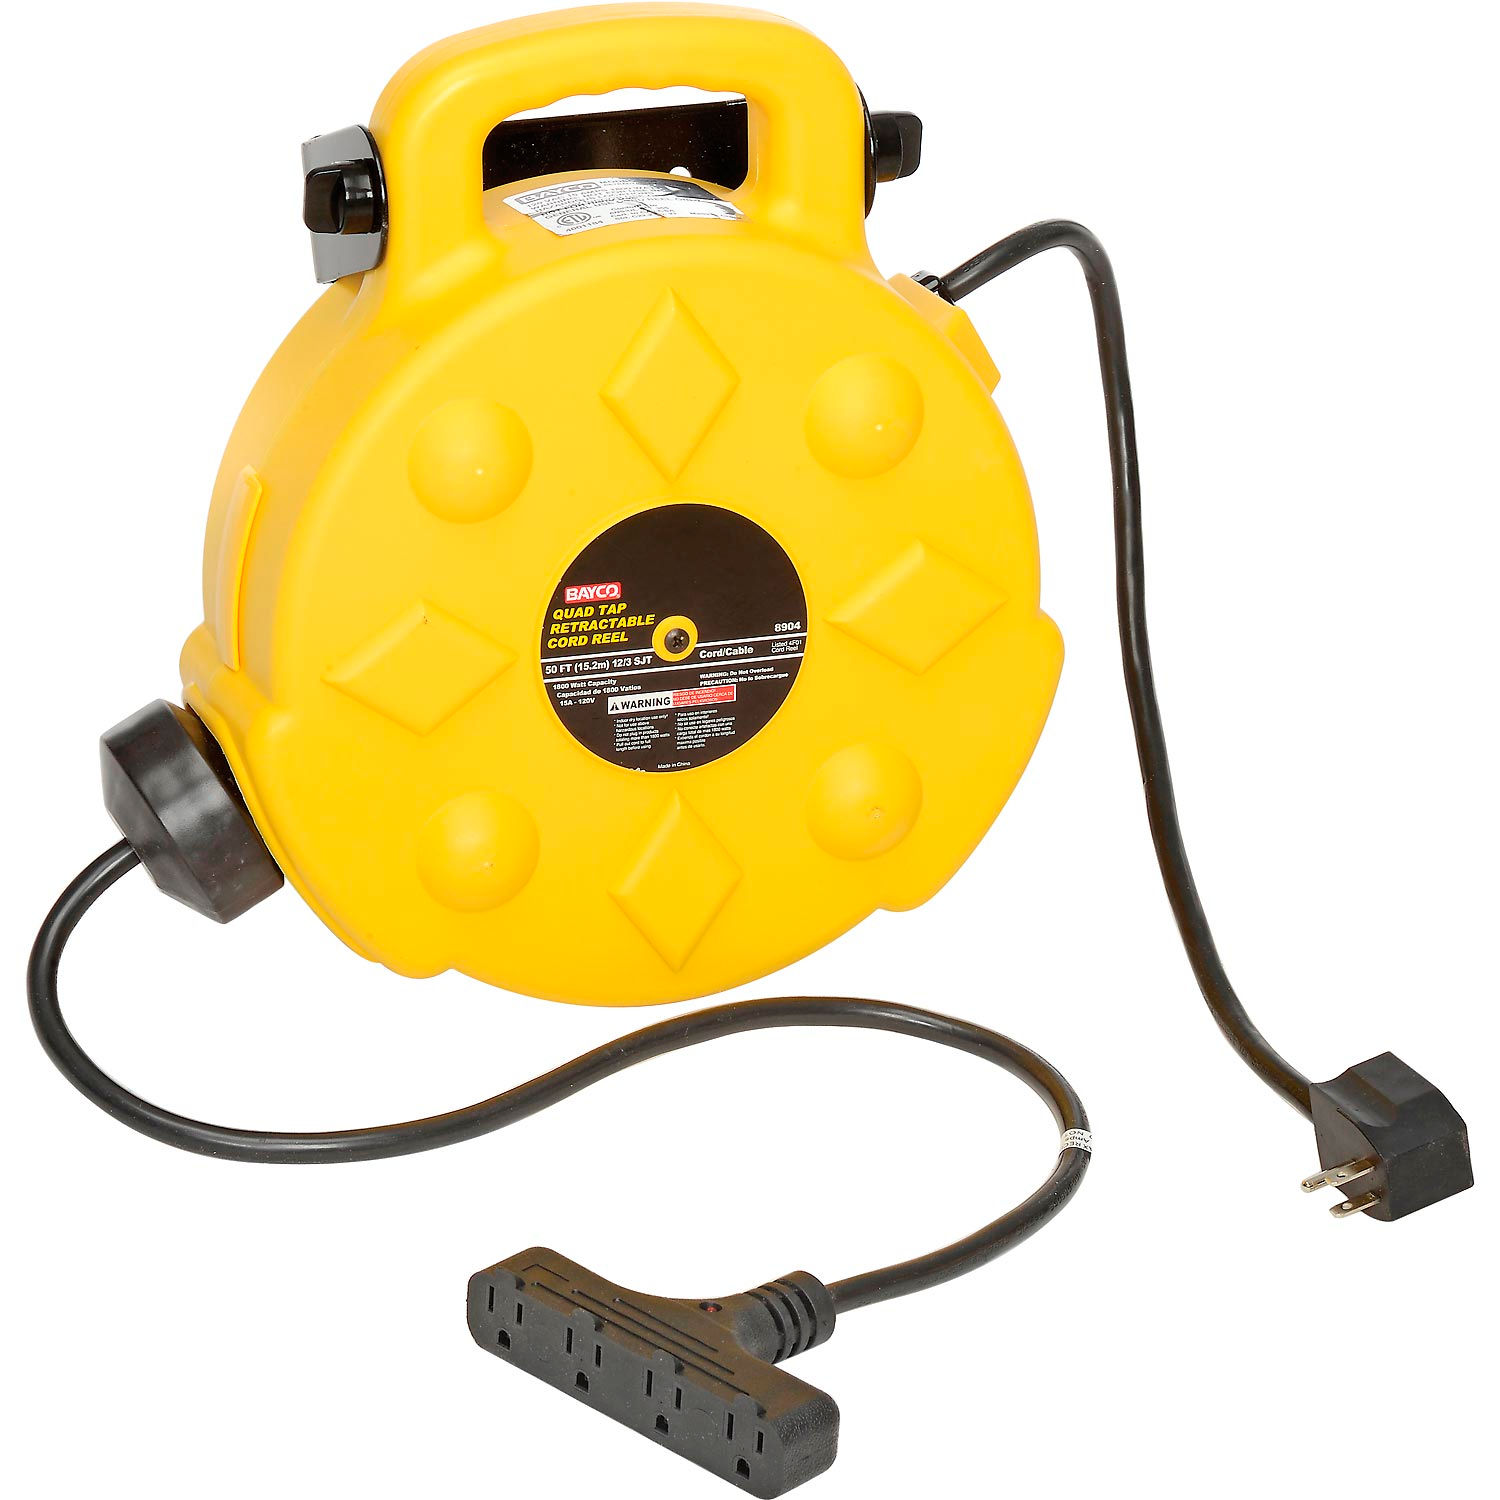 Hose & Cord Reels | Electrical Cable Reels | Bayco® Professional Quad ...